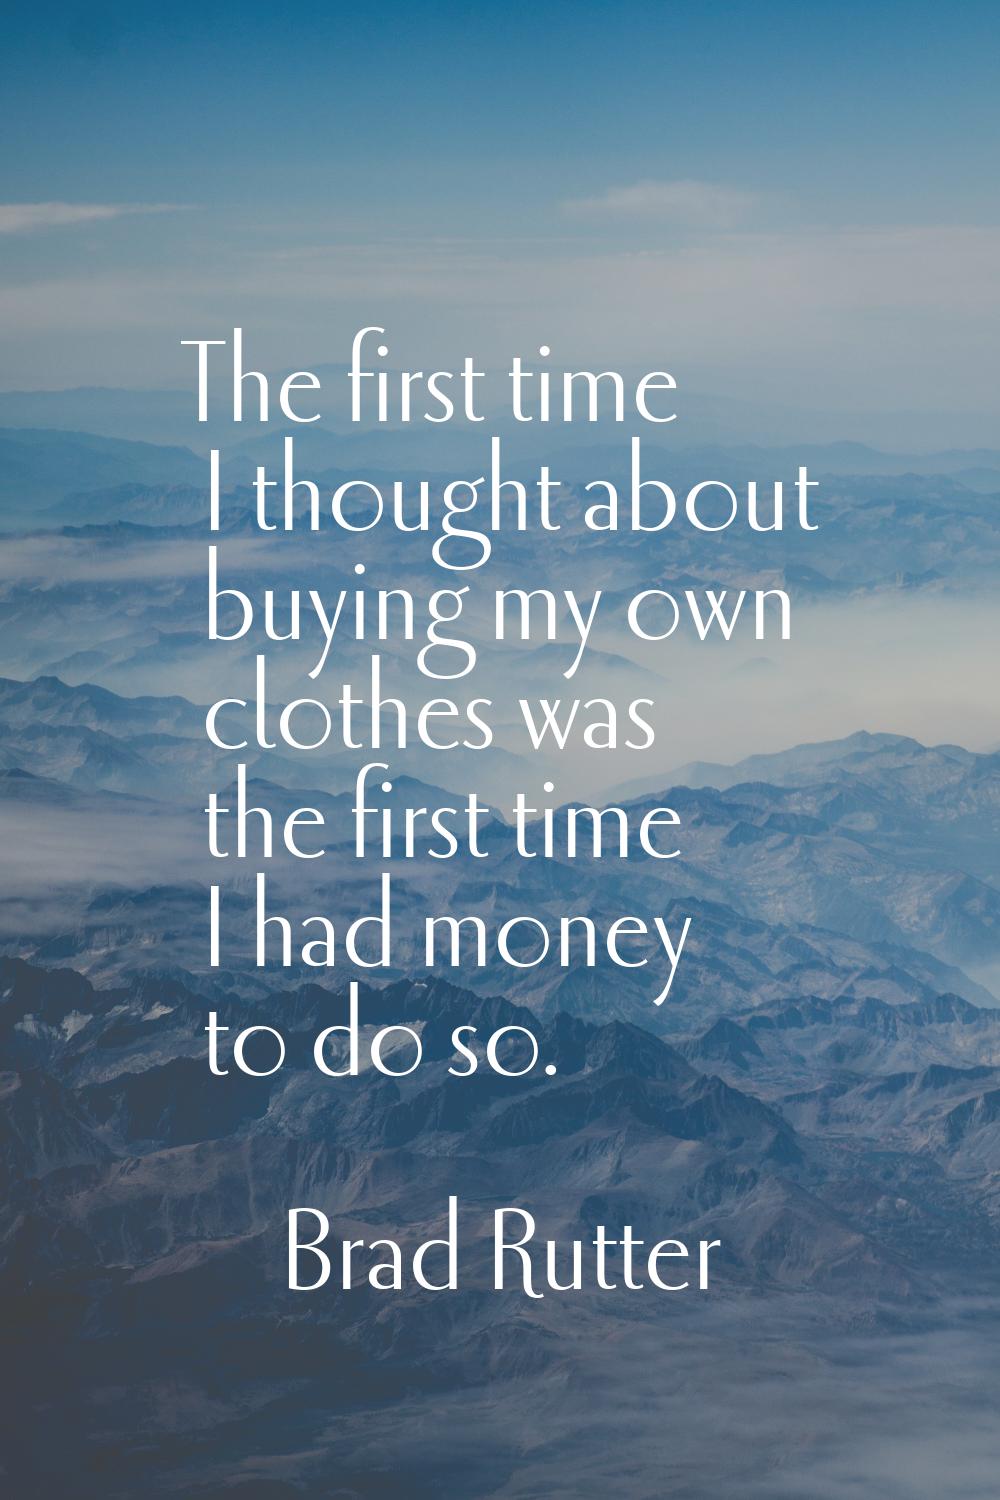 The first time I thought about buying my own clothes was the first time I had money to do so.